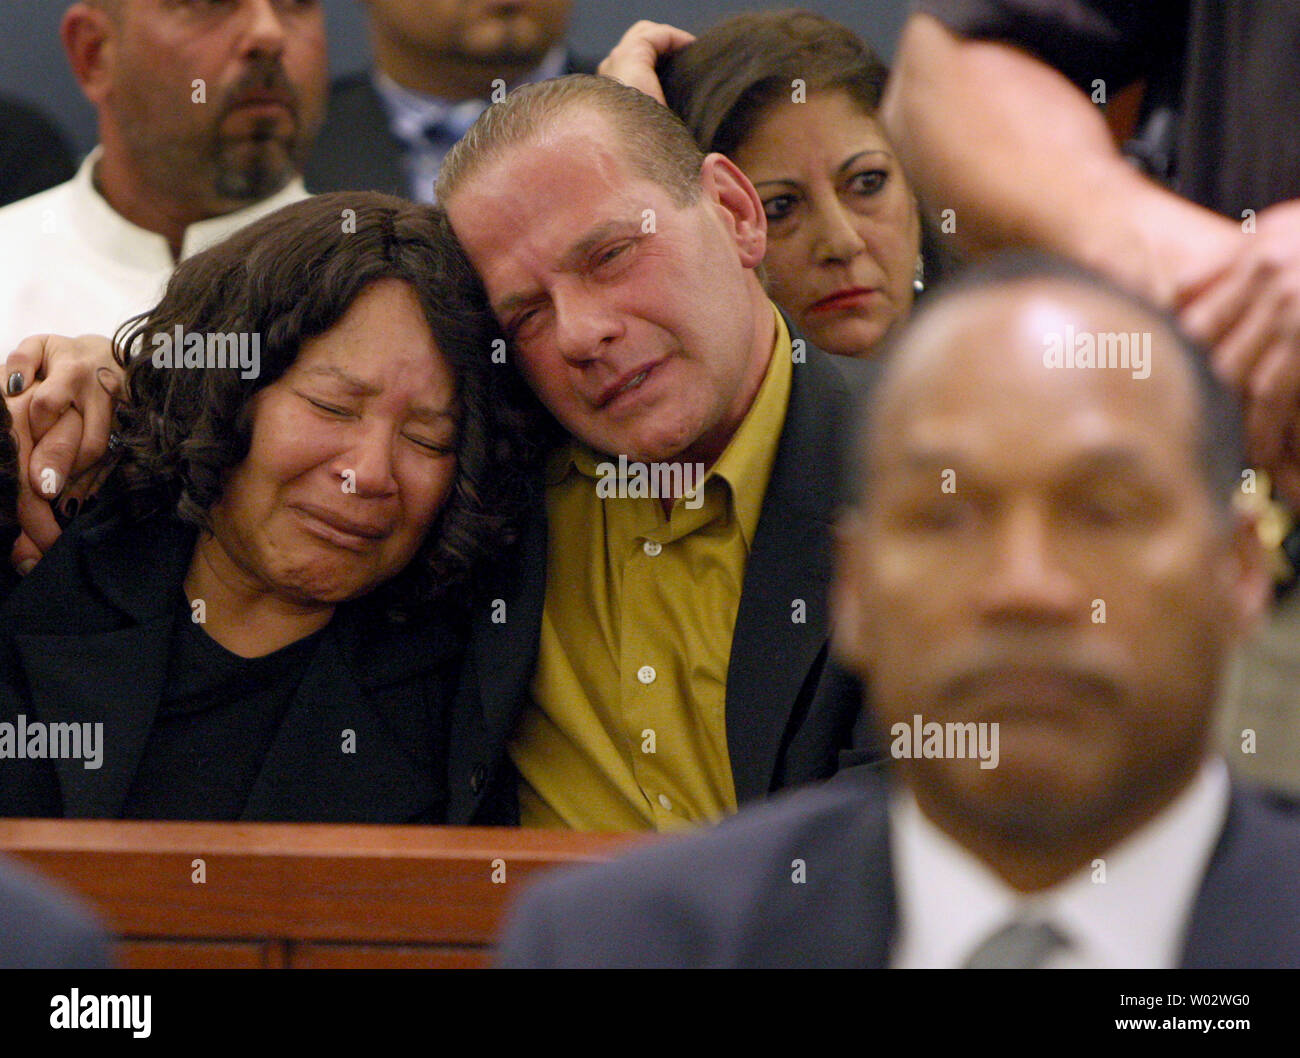 O.J. Simpson's sister Carmelita Durio (L) and friend Tom Scotto react as Simpson is found guilty on all 12 charges, including felony kidnapping, armed robbery and conspiracy at the Clark County Regional Justice Center in Las Vegas, Nevada on October 3, 2008. The verdict comes 13 years to the day after Simpson was acquitted of murdering his ex-wife Nicole Brown Simpson and Ron Goldman. (UPI Photo/Daniel Gluskoter) Stock Photo